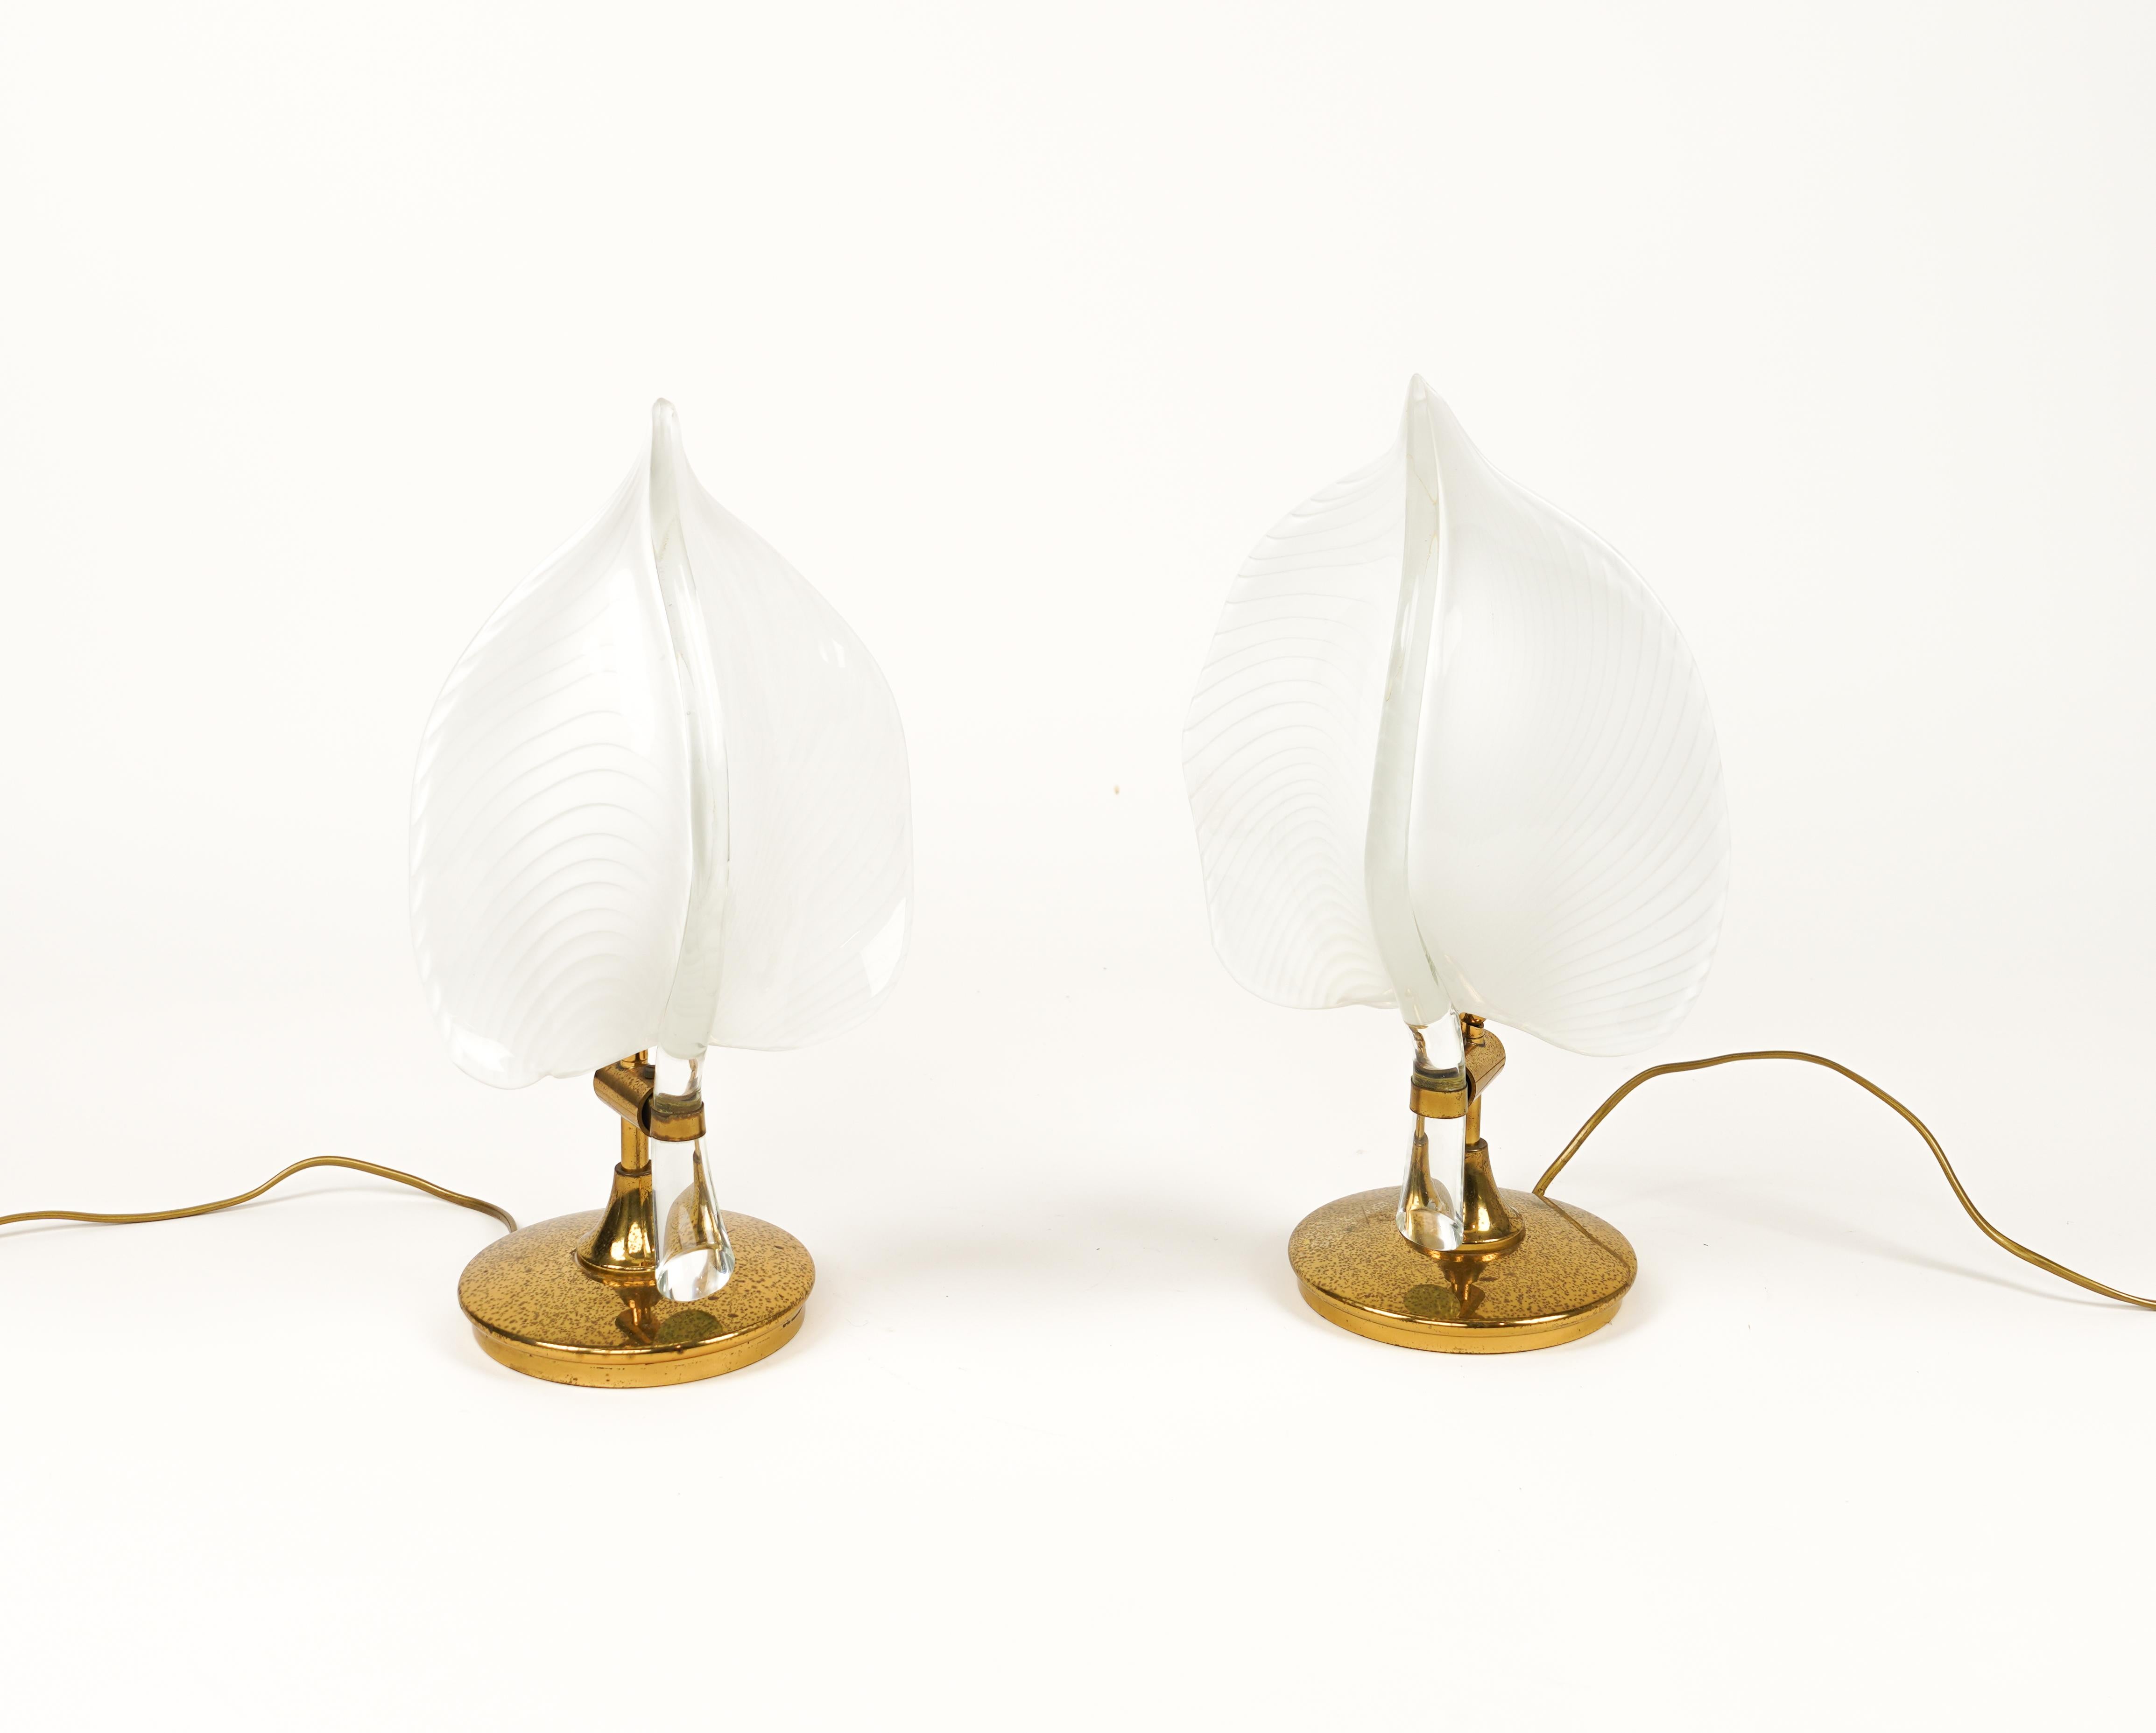 Italian Pair of Table Lamps in Murano Glass and Brass by Franco Luce, Italy 1970s For Sale